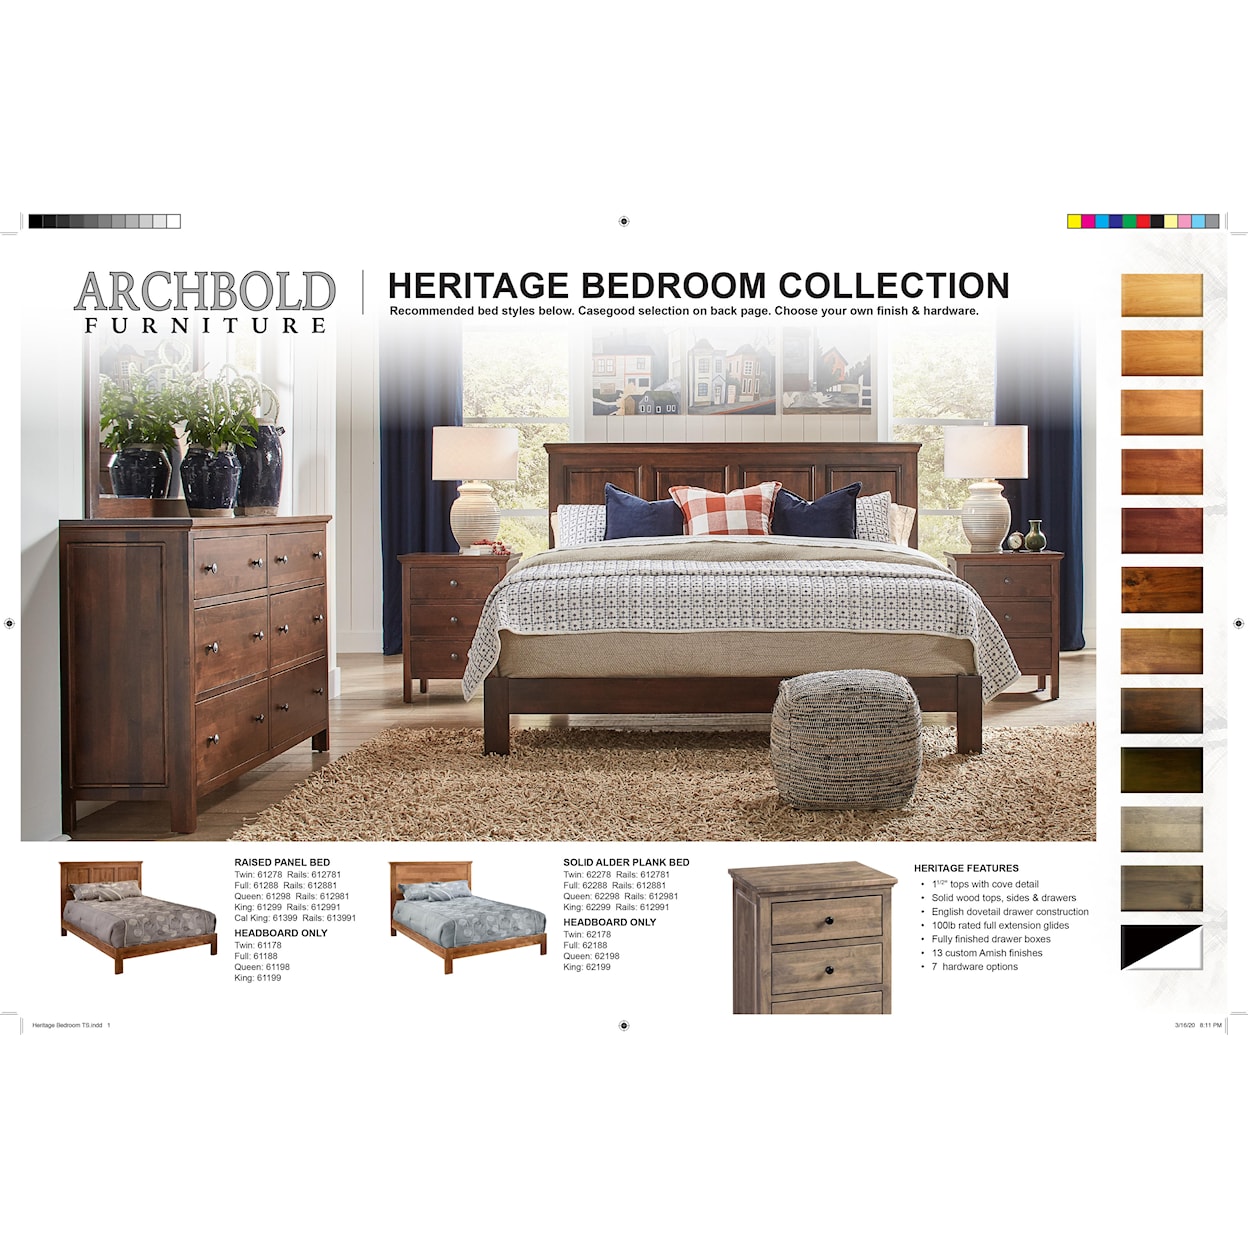 Archbold Furniture Beds Queen Elevated Storage Bed